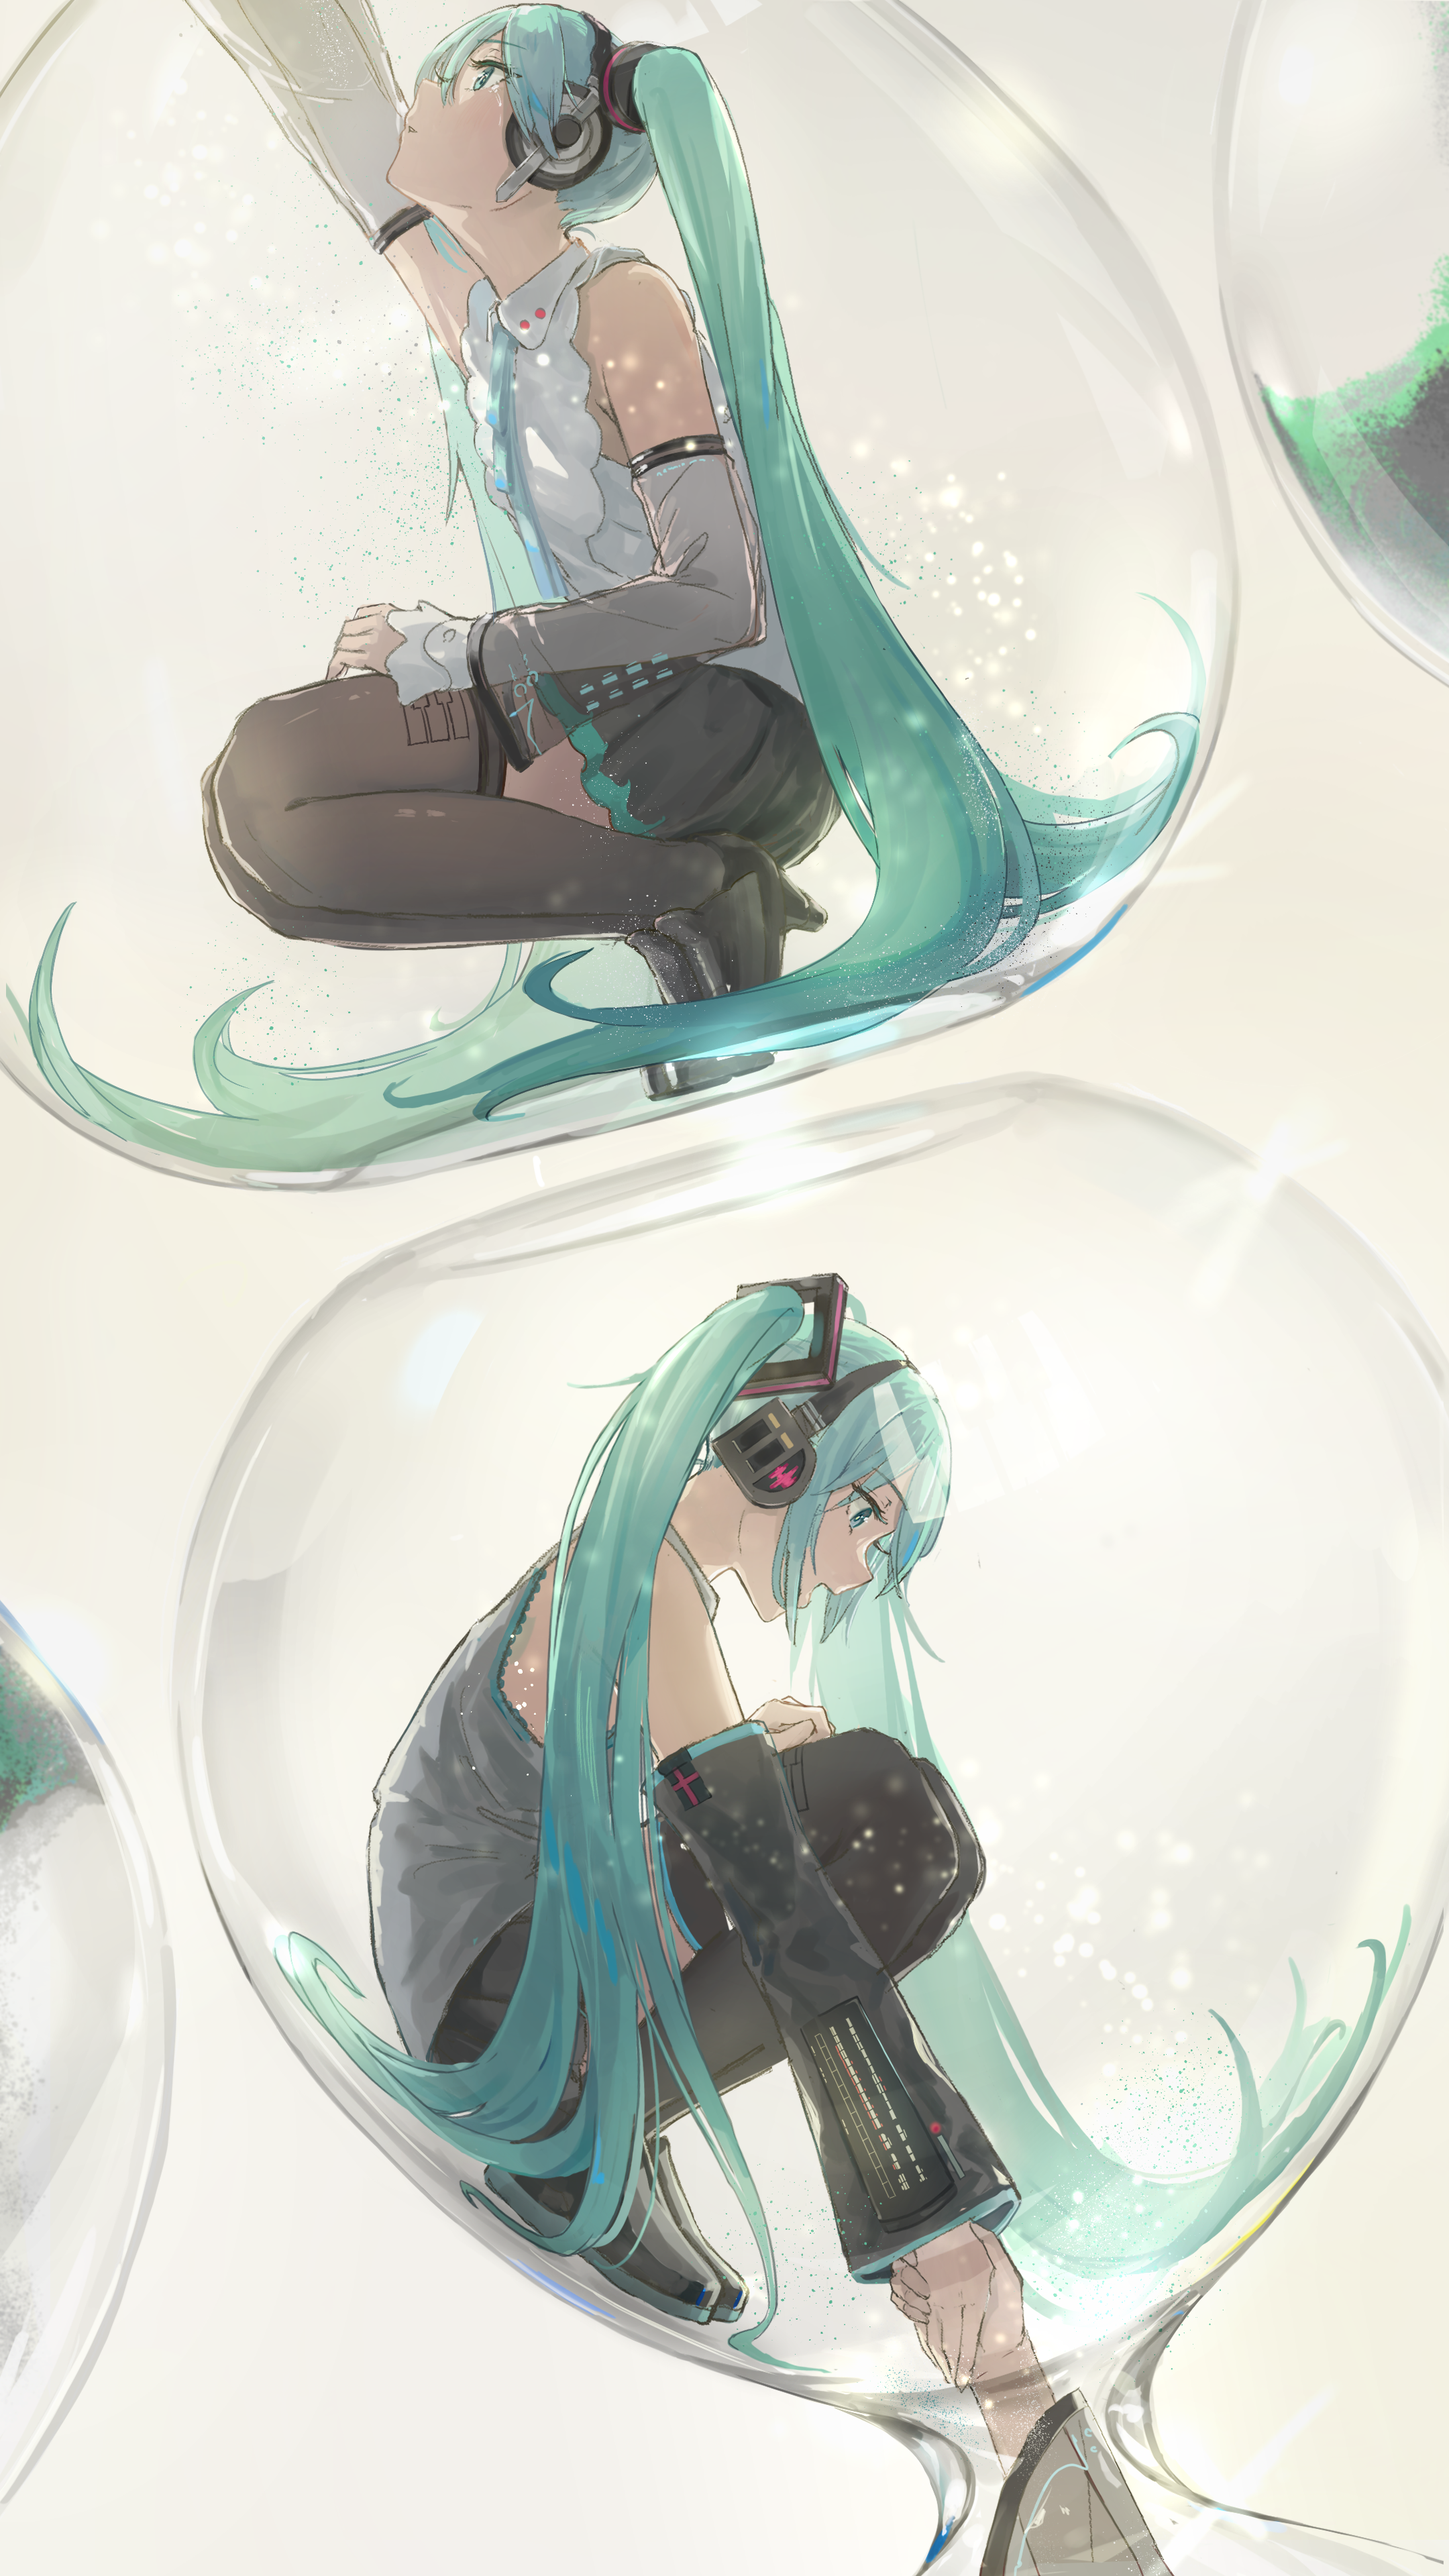 Anime 2160x3840 Hatsune Miku anime anime girls Vocaloid blue hair blue eyes portrait display glass hourglasses long hair twintails squatting headsets